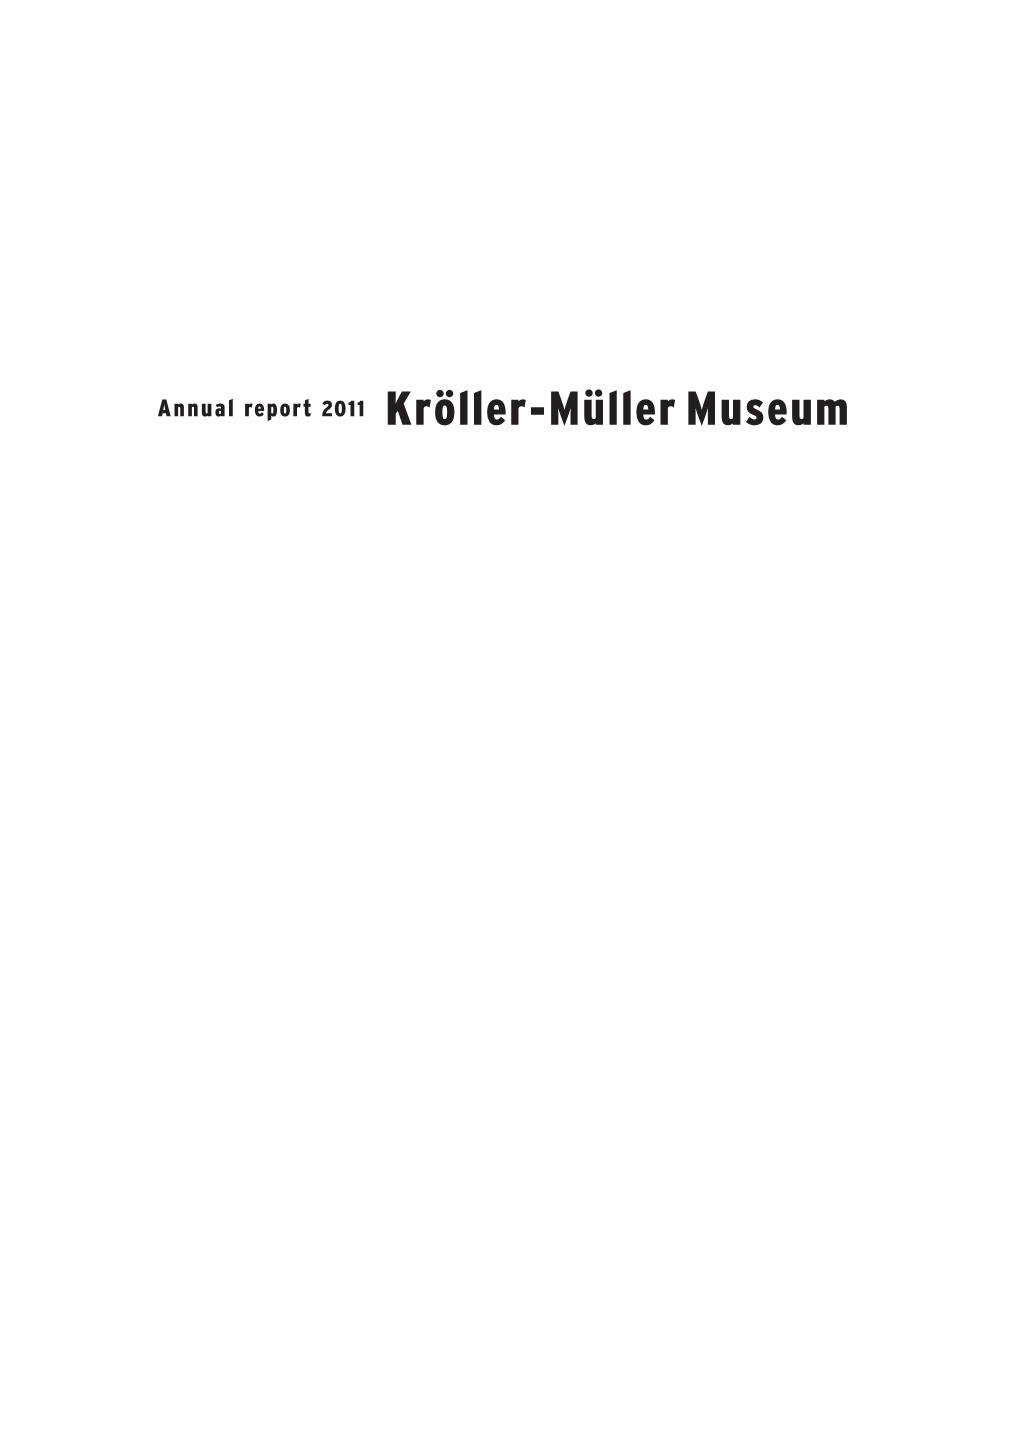 Annual Report 2011 Kröller-Müller Museum Introduction Mission and History Foreword Board of Trustees Mission and Historical Perspective